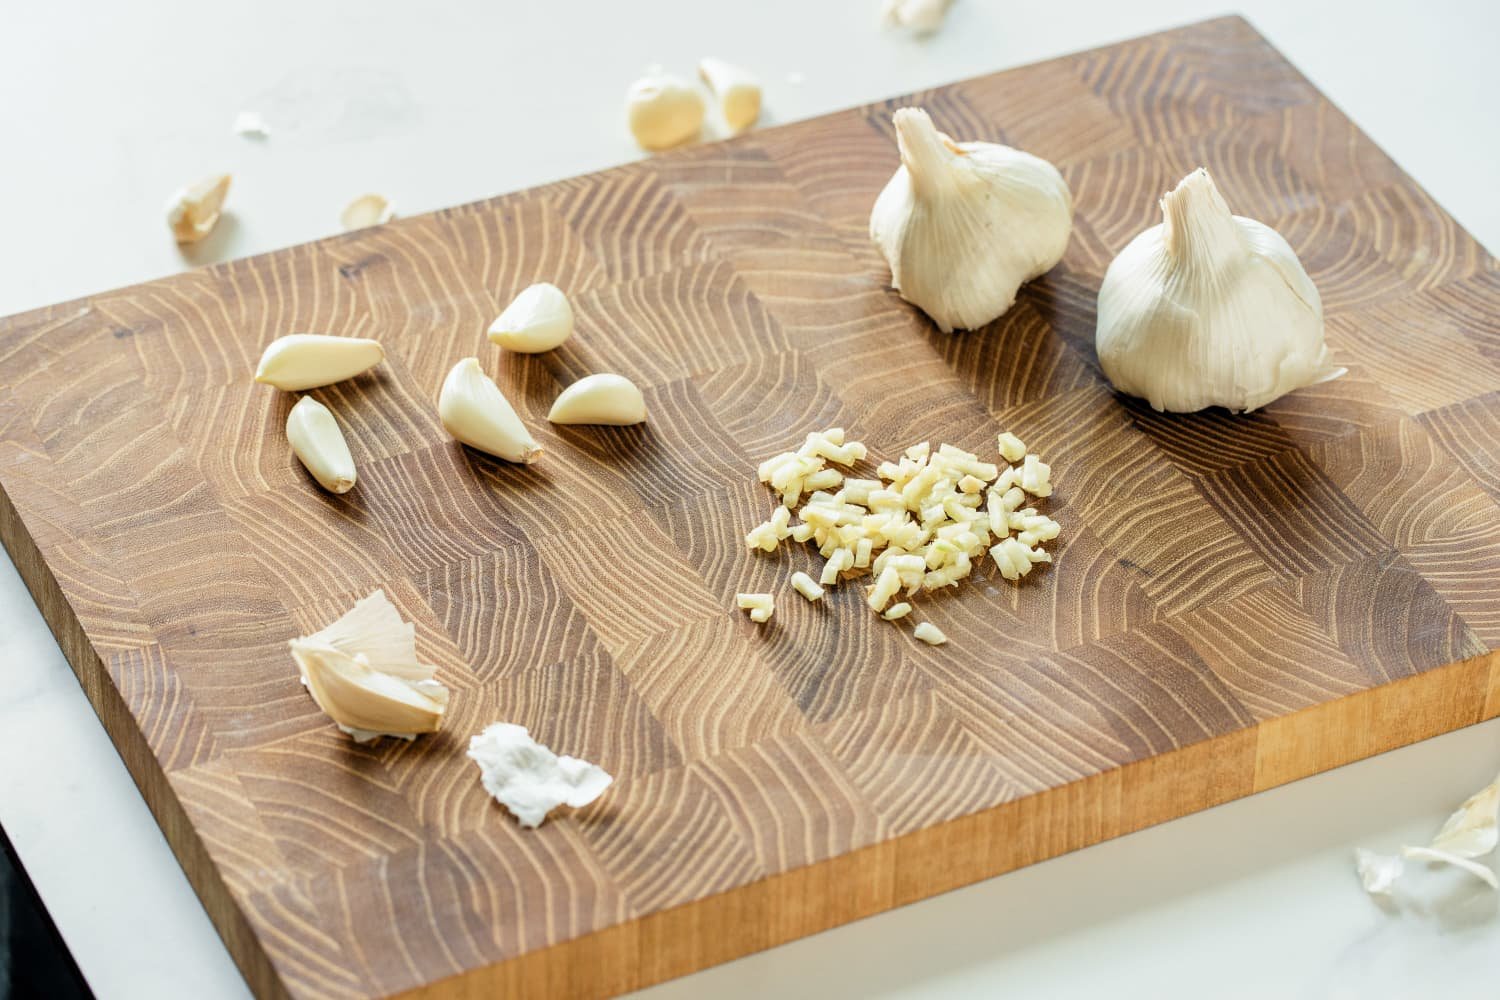 Two Super Important Things to Keep in Mind When Buying Garlic, According to Garlic Growers